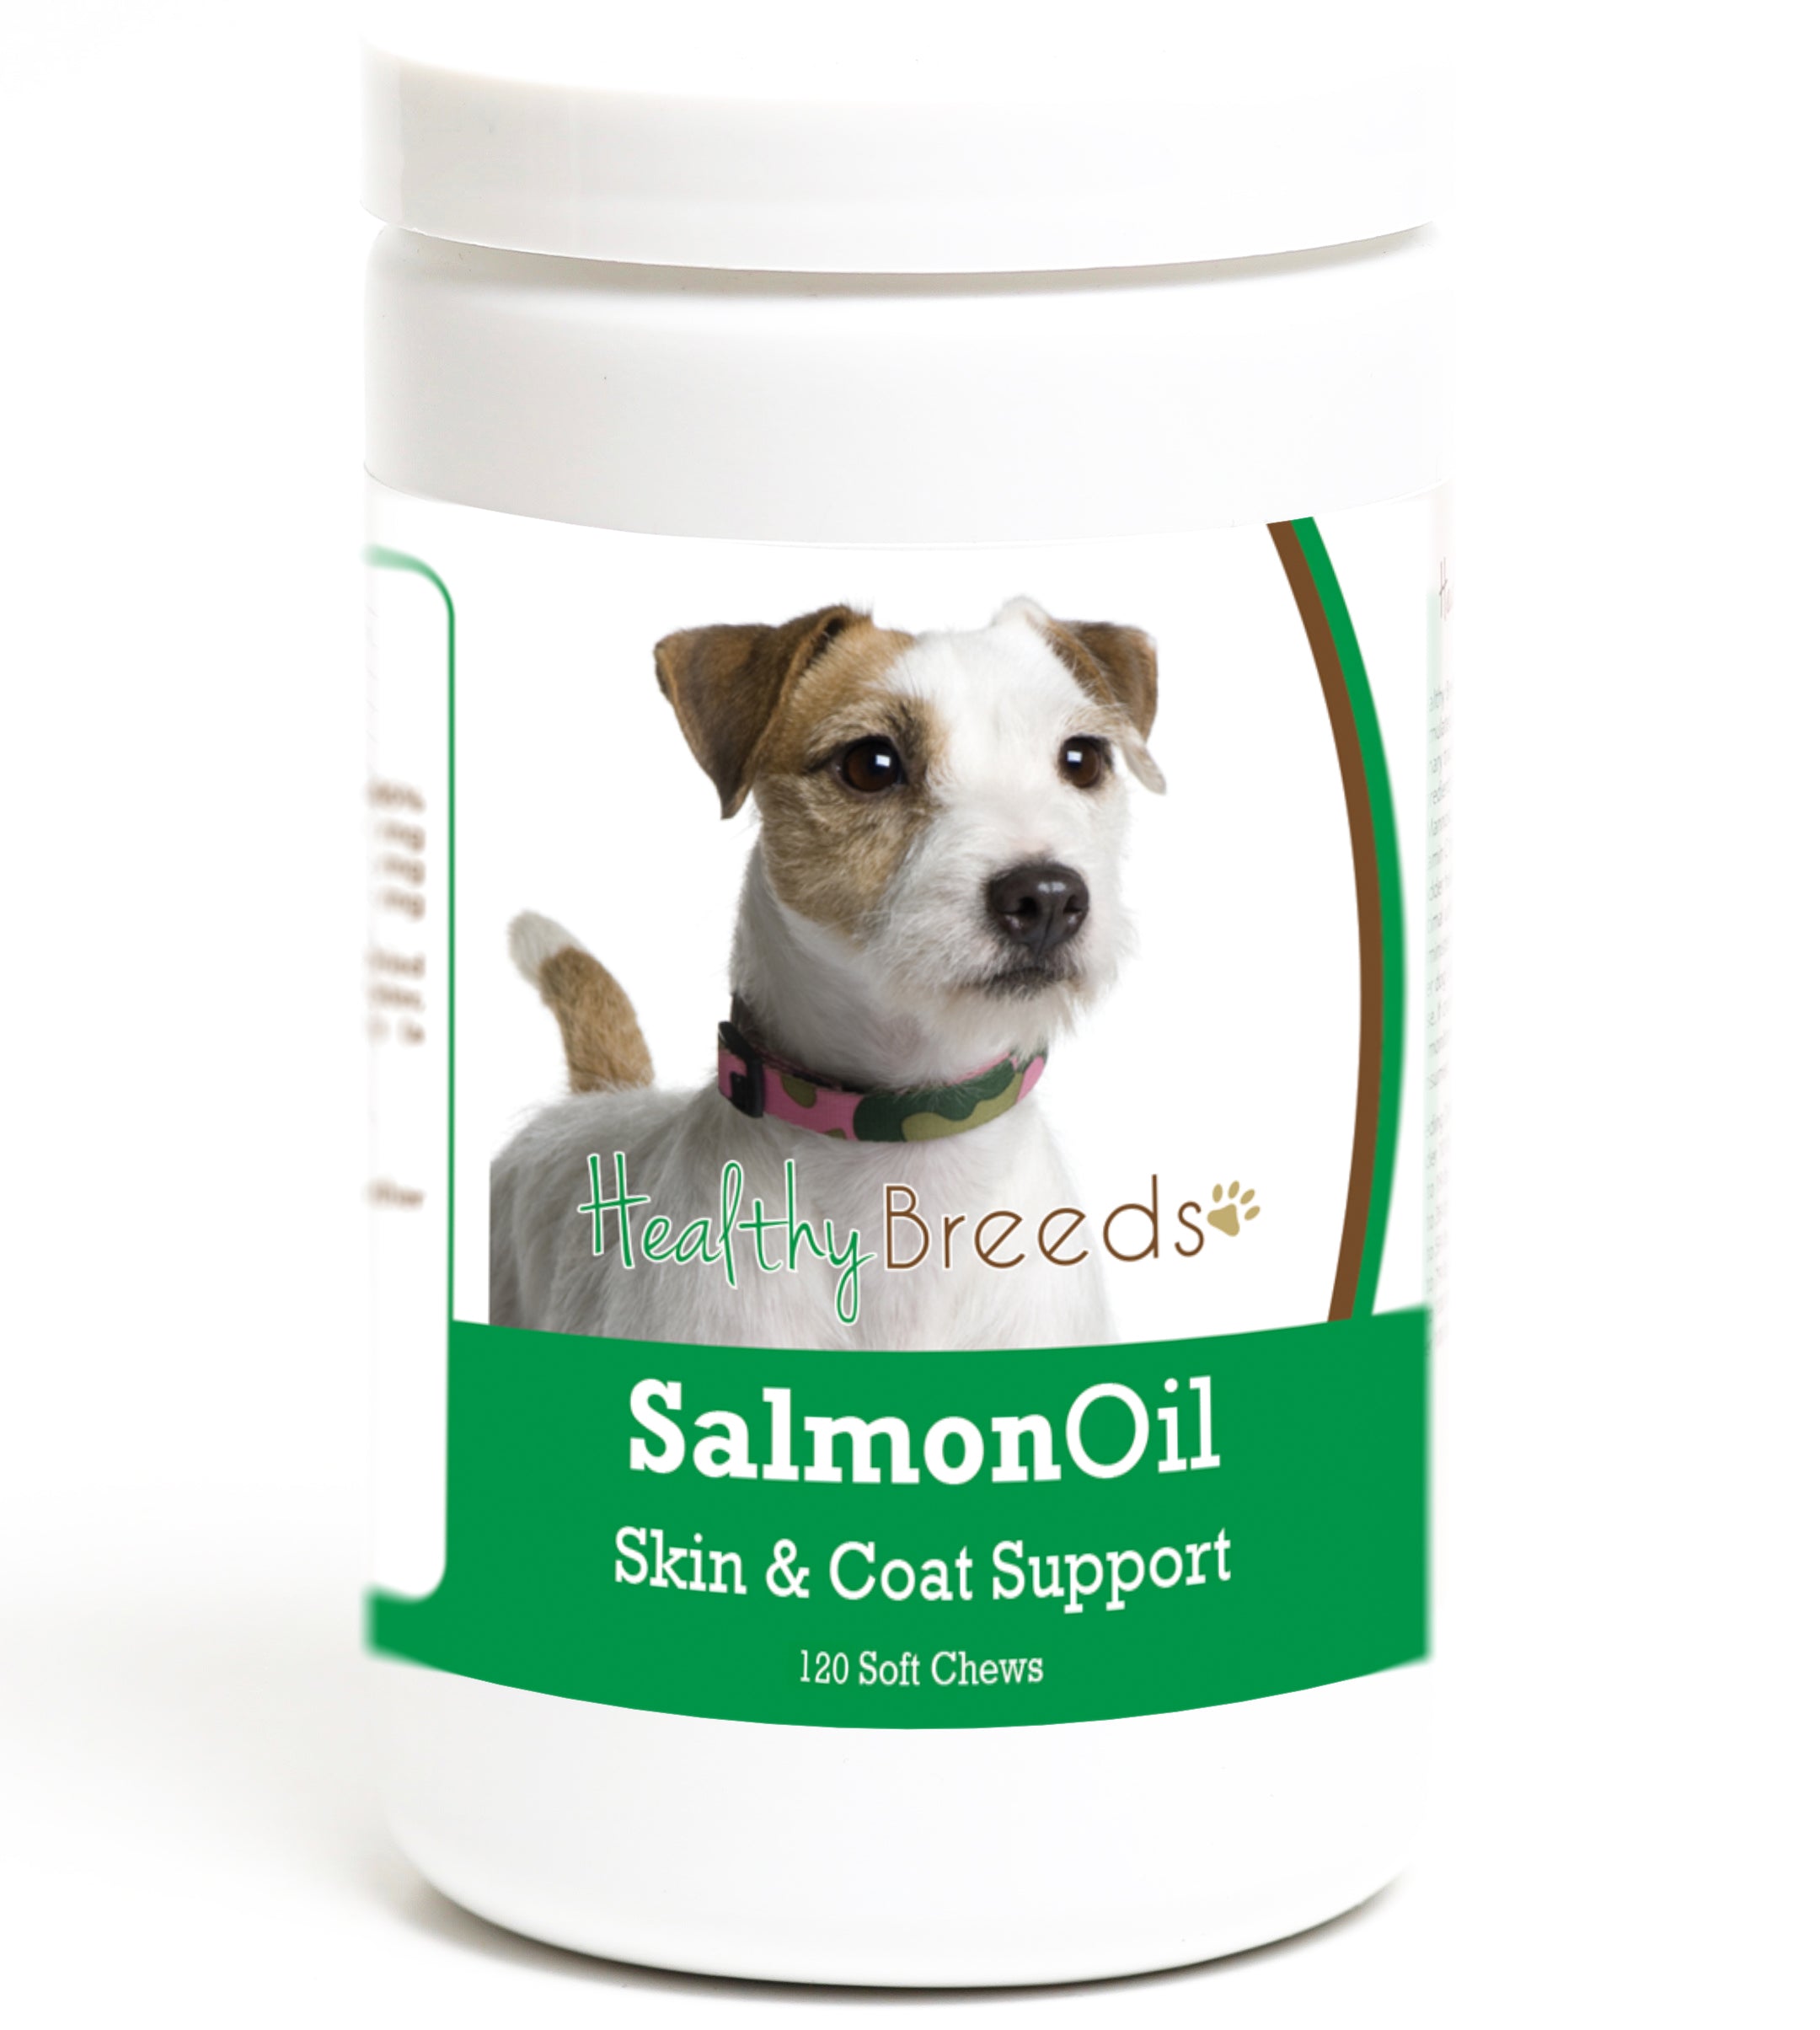 Parson Russell Terrier Salmon Oil Soft Chews 120 Count